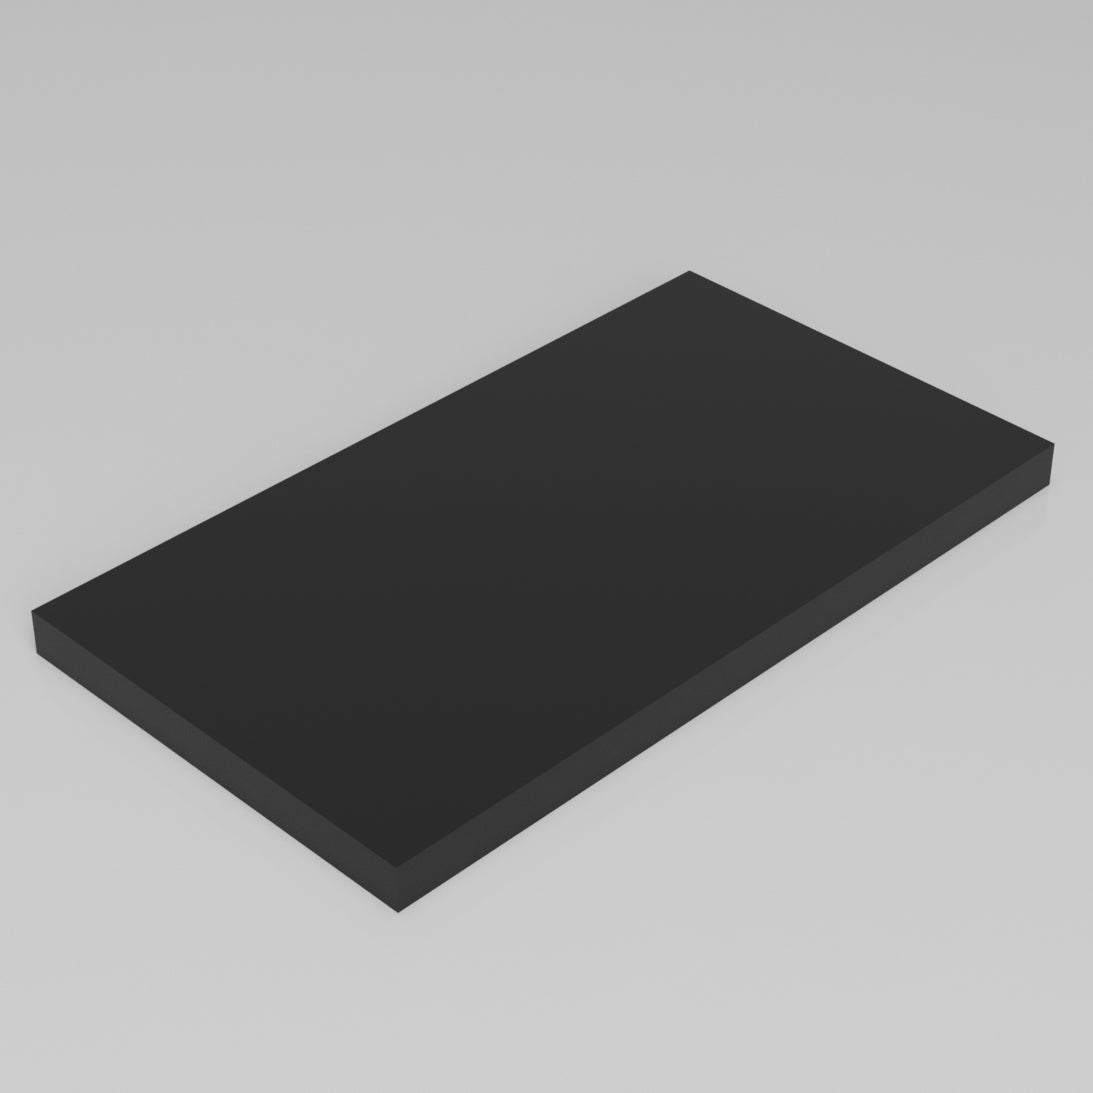 Machinable Wax Rectangular Block Front View 1 Inch by 10 Inch by 18 Inch